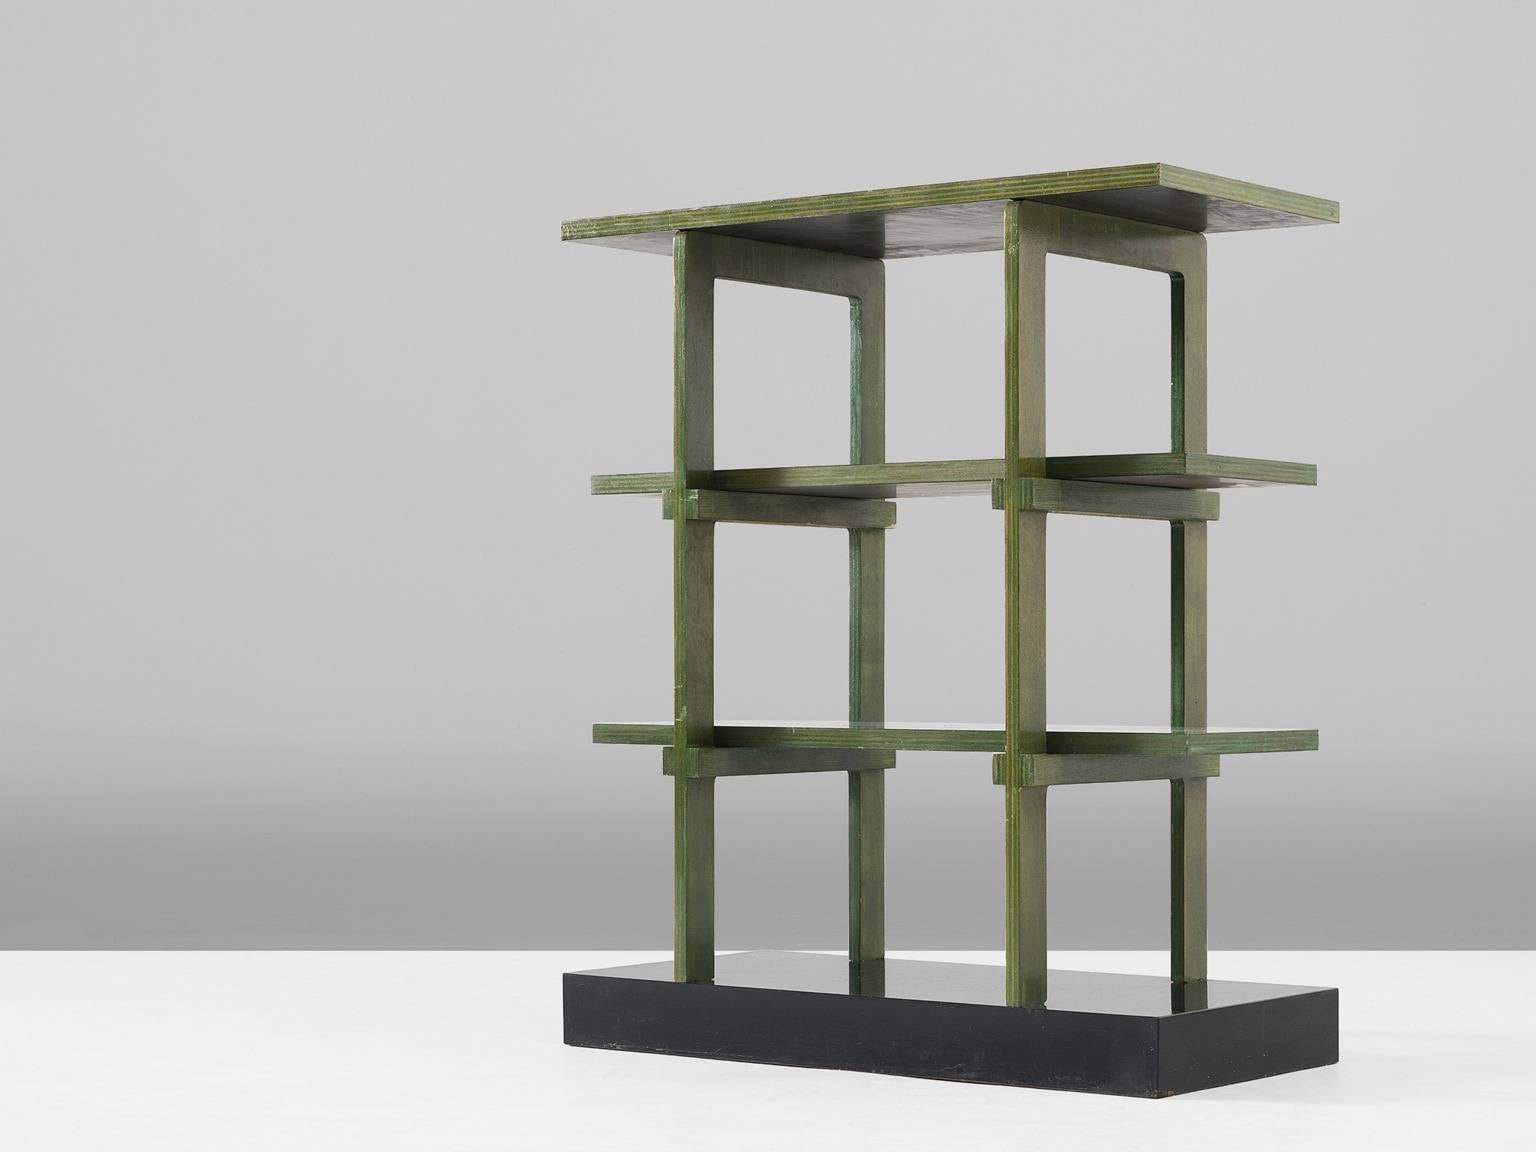 Gabetti & Isola, bookcase, black and green wood, Italy, 1950s. 

Beautiful green colored room divider. This bookcase is divided over three levels with two shelves. A simplistic design, yet highly effective. The black shimmering base makes a nice